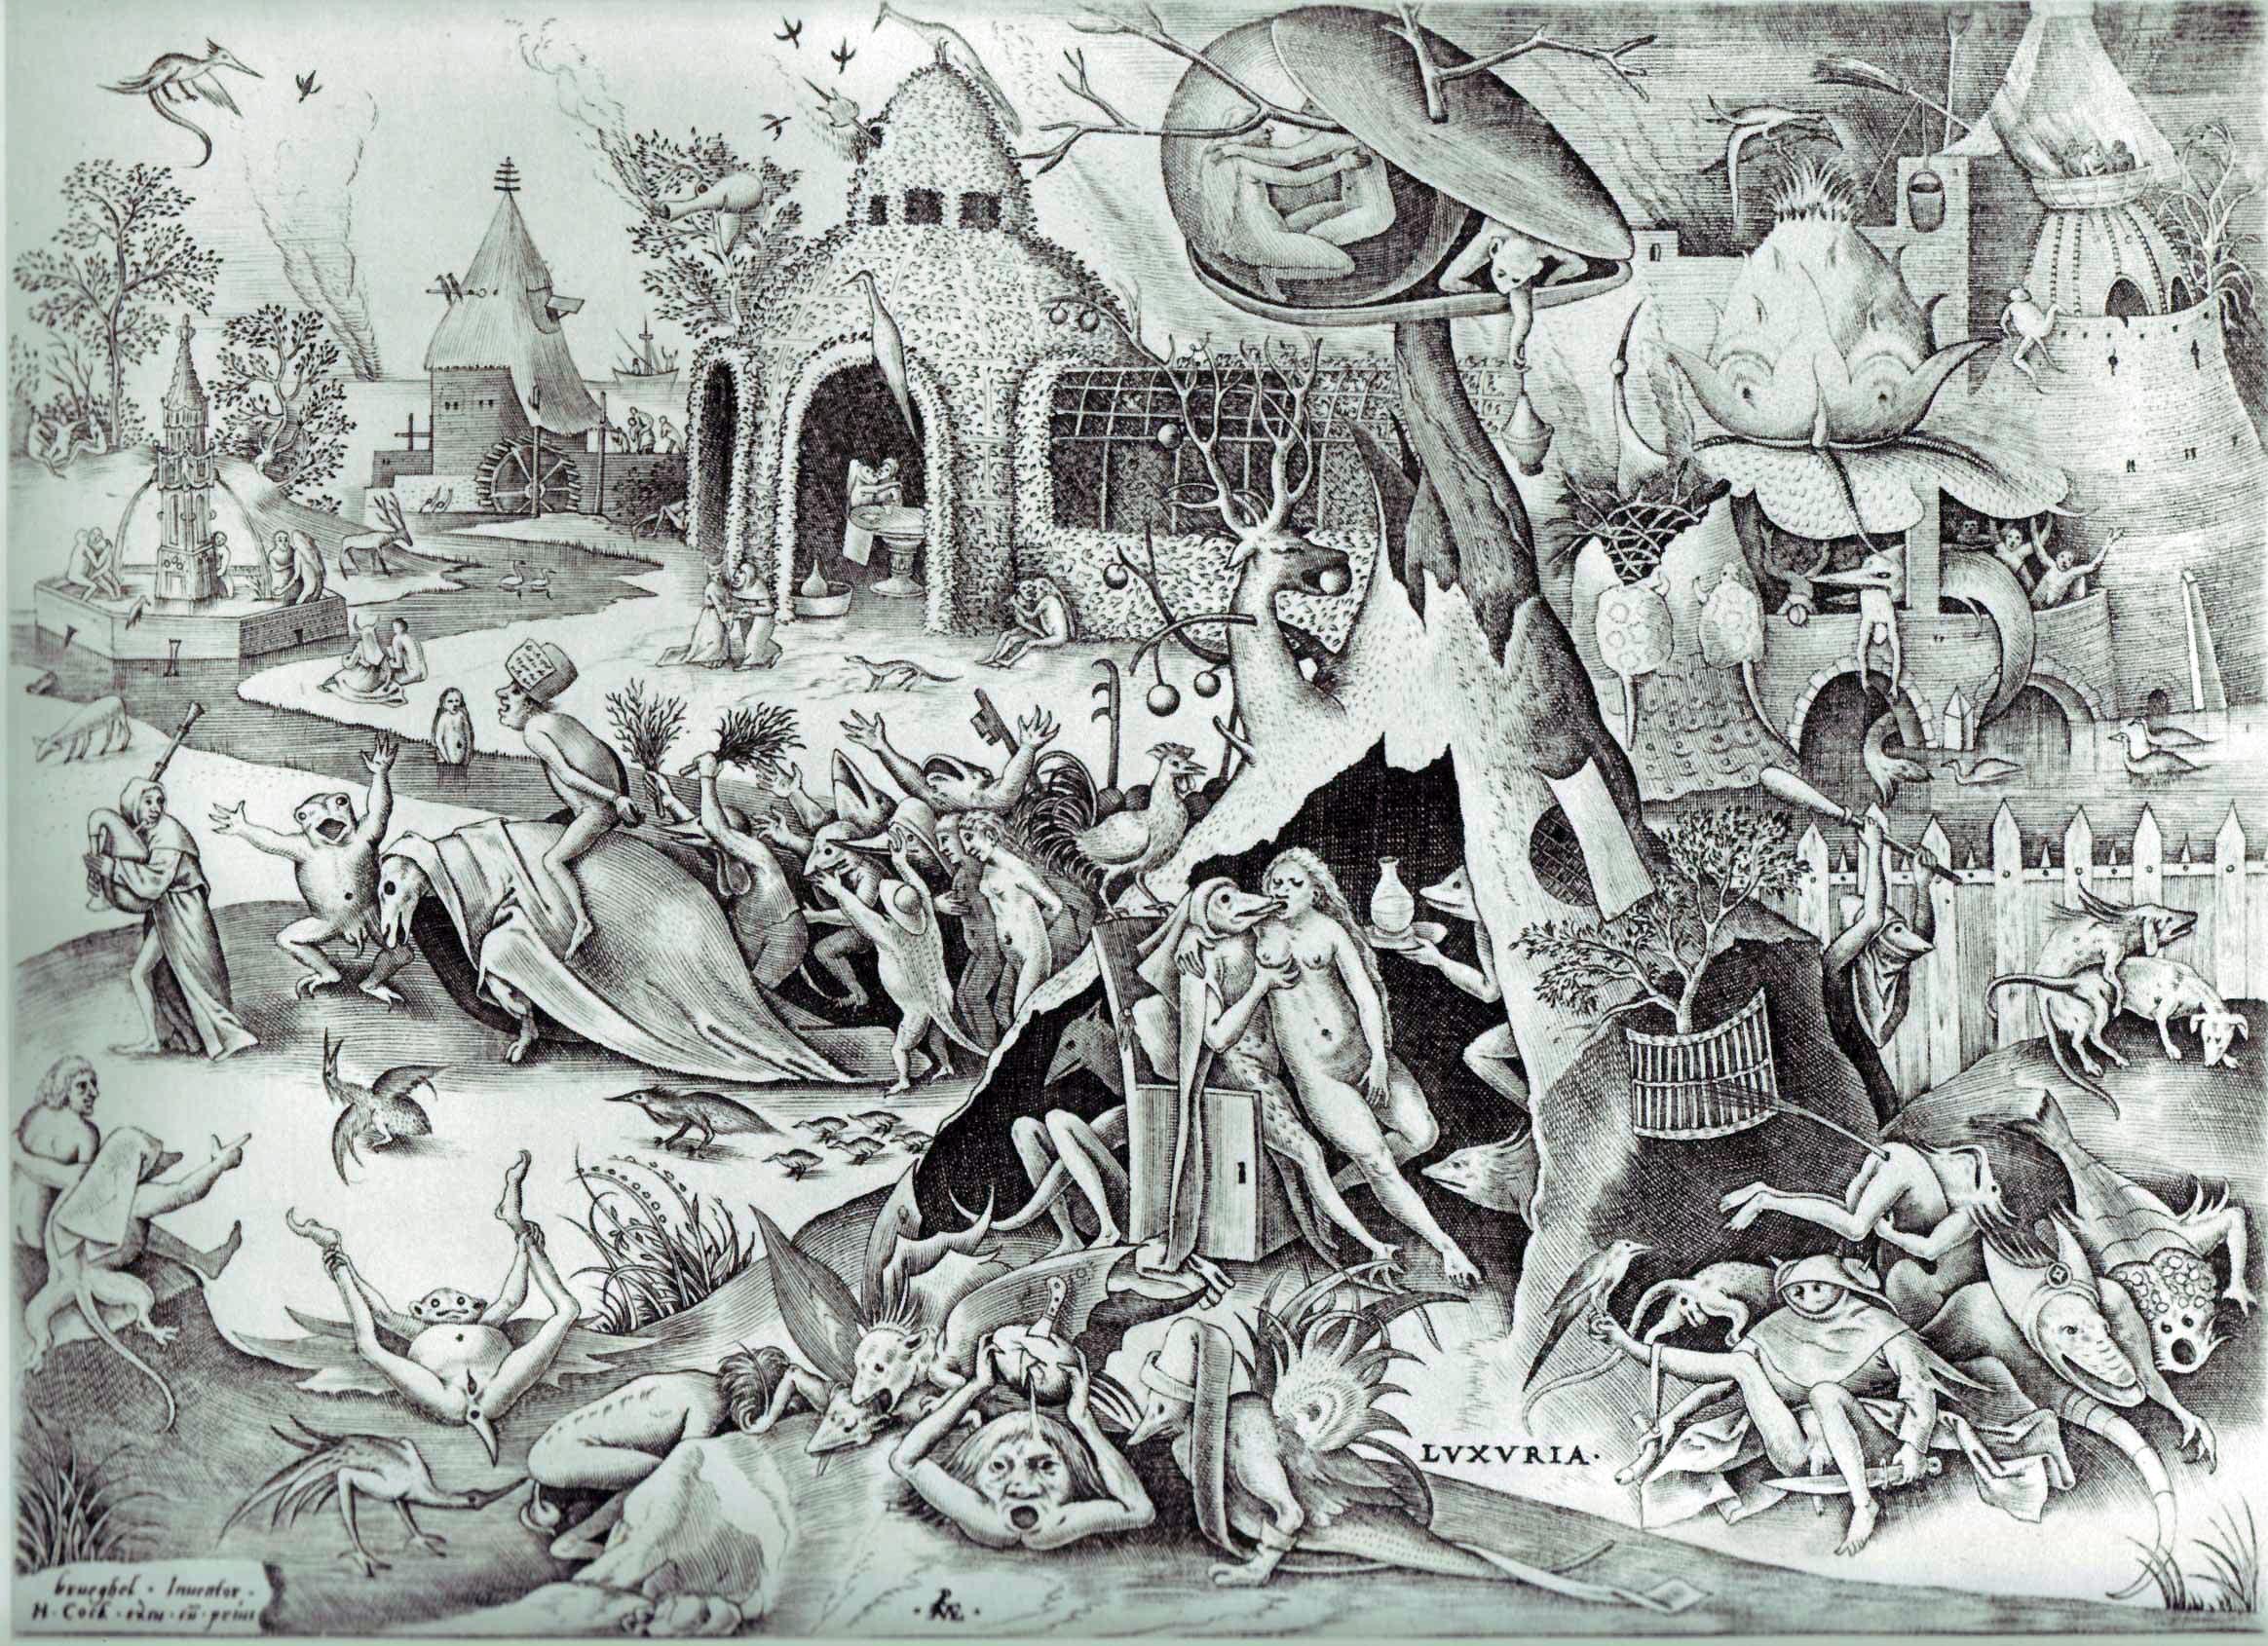 Pieter Bruegel’s  
Lechery , part of a series of etchings and engravings from 1558 on each of the Deadly Sins